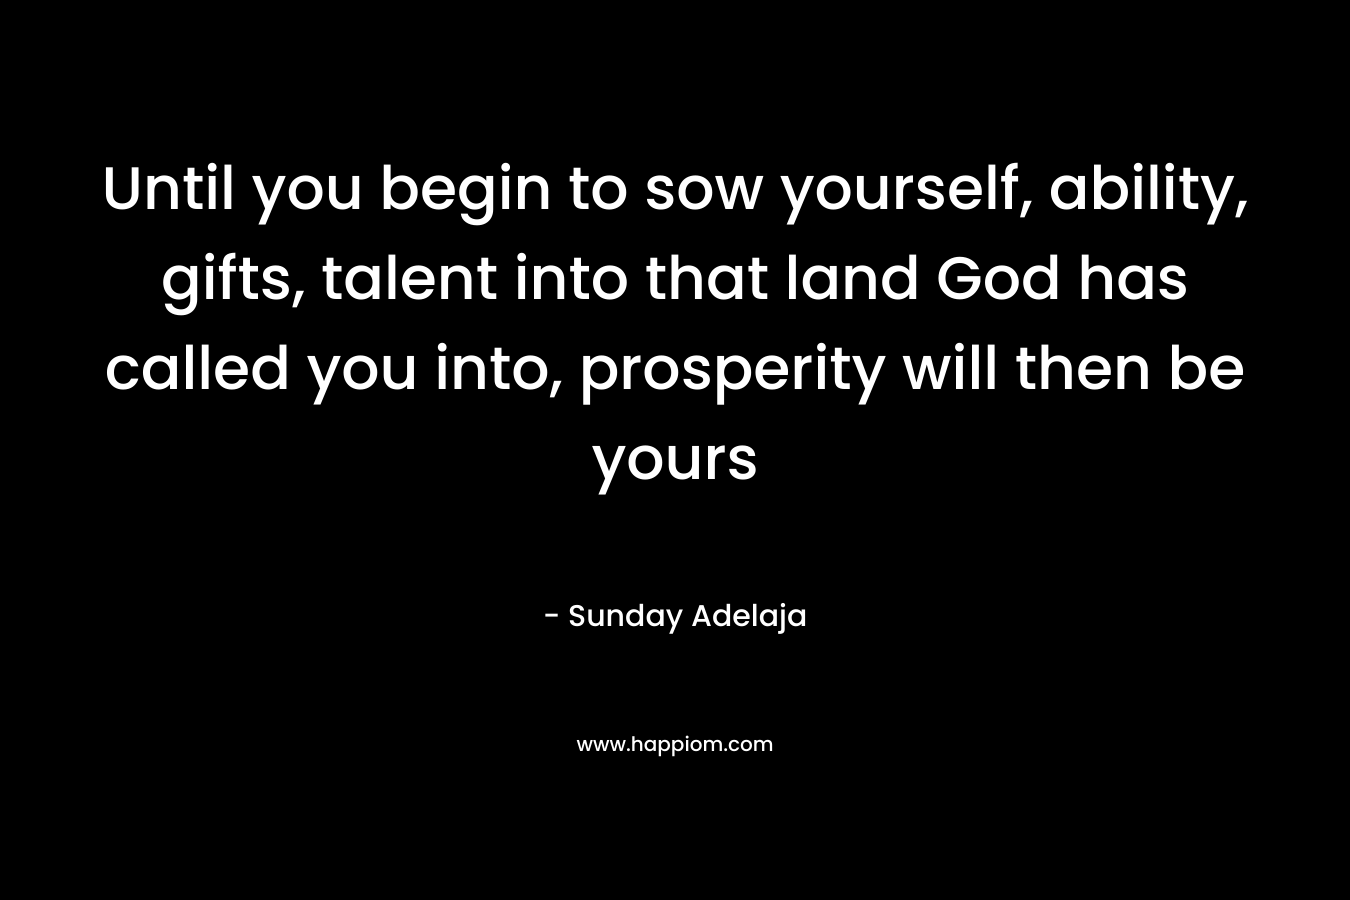 Until you begin to sow yourself, ability, gifts, talent into that land God has called you into, prosperity will then be yours